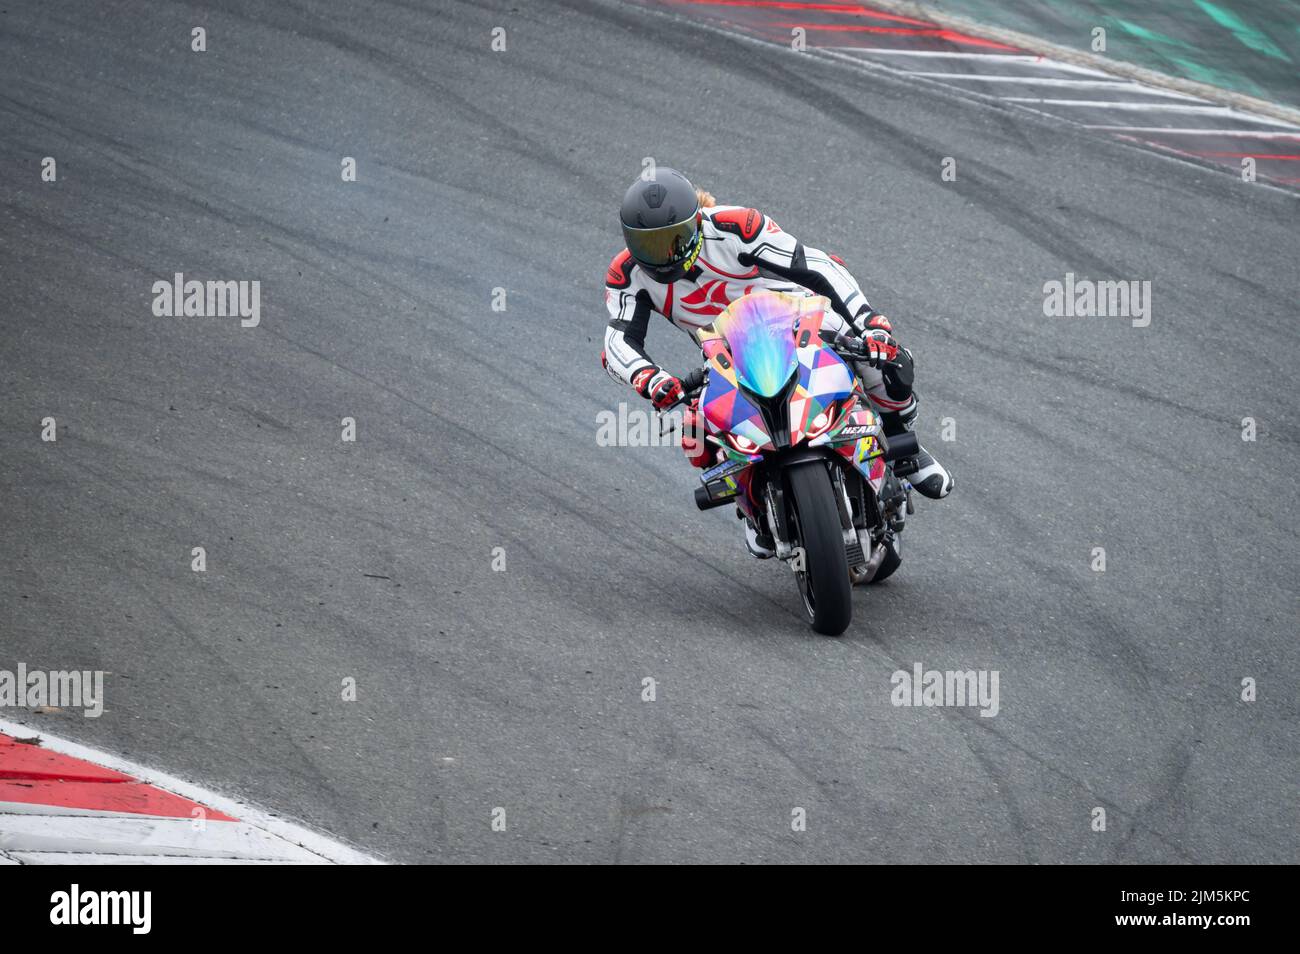 Moto BMW M1000RR doing drift in the track Stock Photo